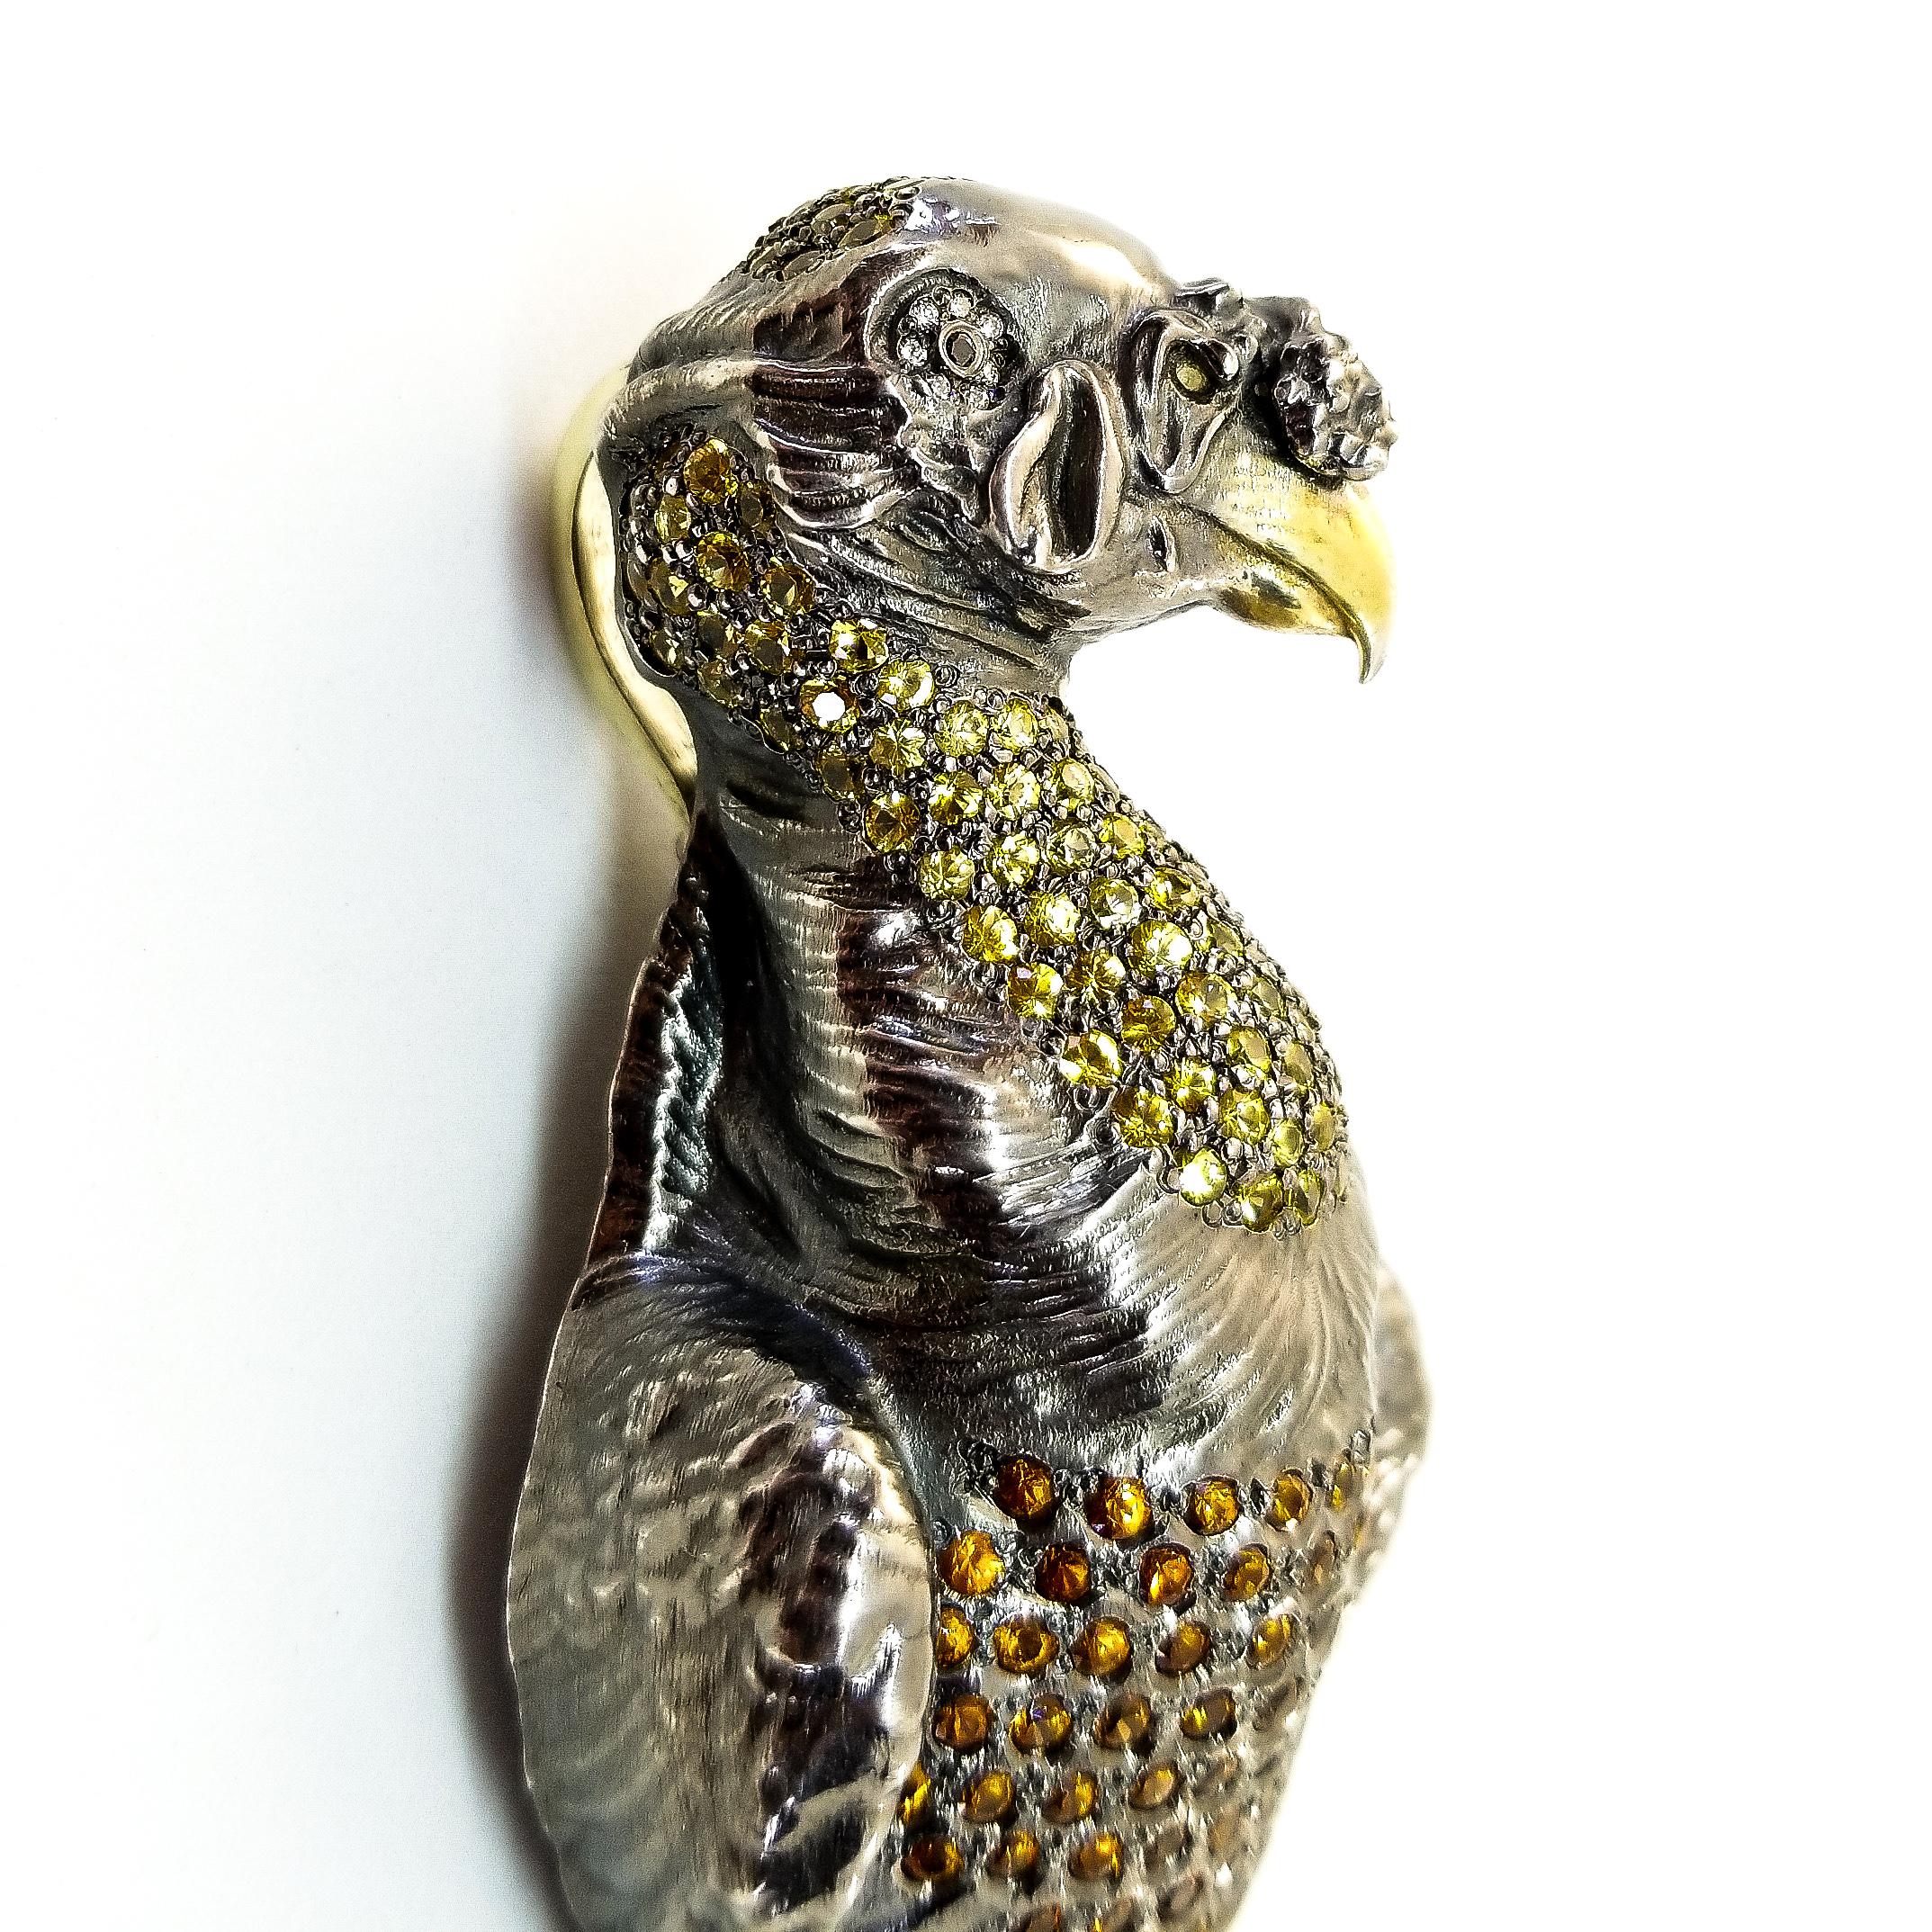 Unique. One of a Kind. Statement Piece.
First Casting.
One of a Kind Collection Piece of High Jewelry  /Objet d'art.
The ultimate extravagant gift for the Collector and Lover of Nature. 
The Tom Castor, Jeweled King Condor / Vulture  Enhancer